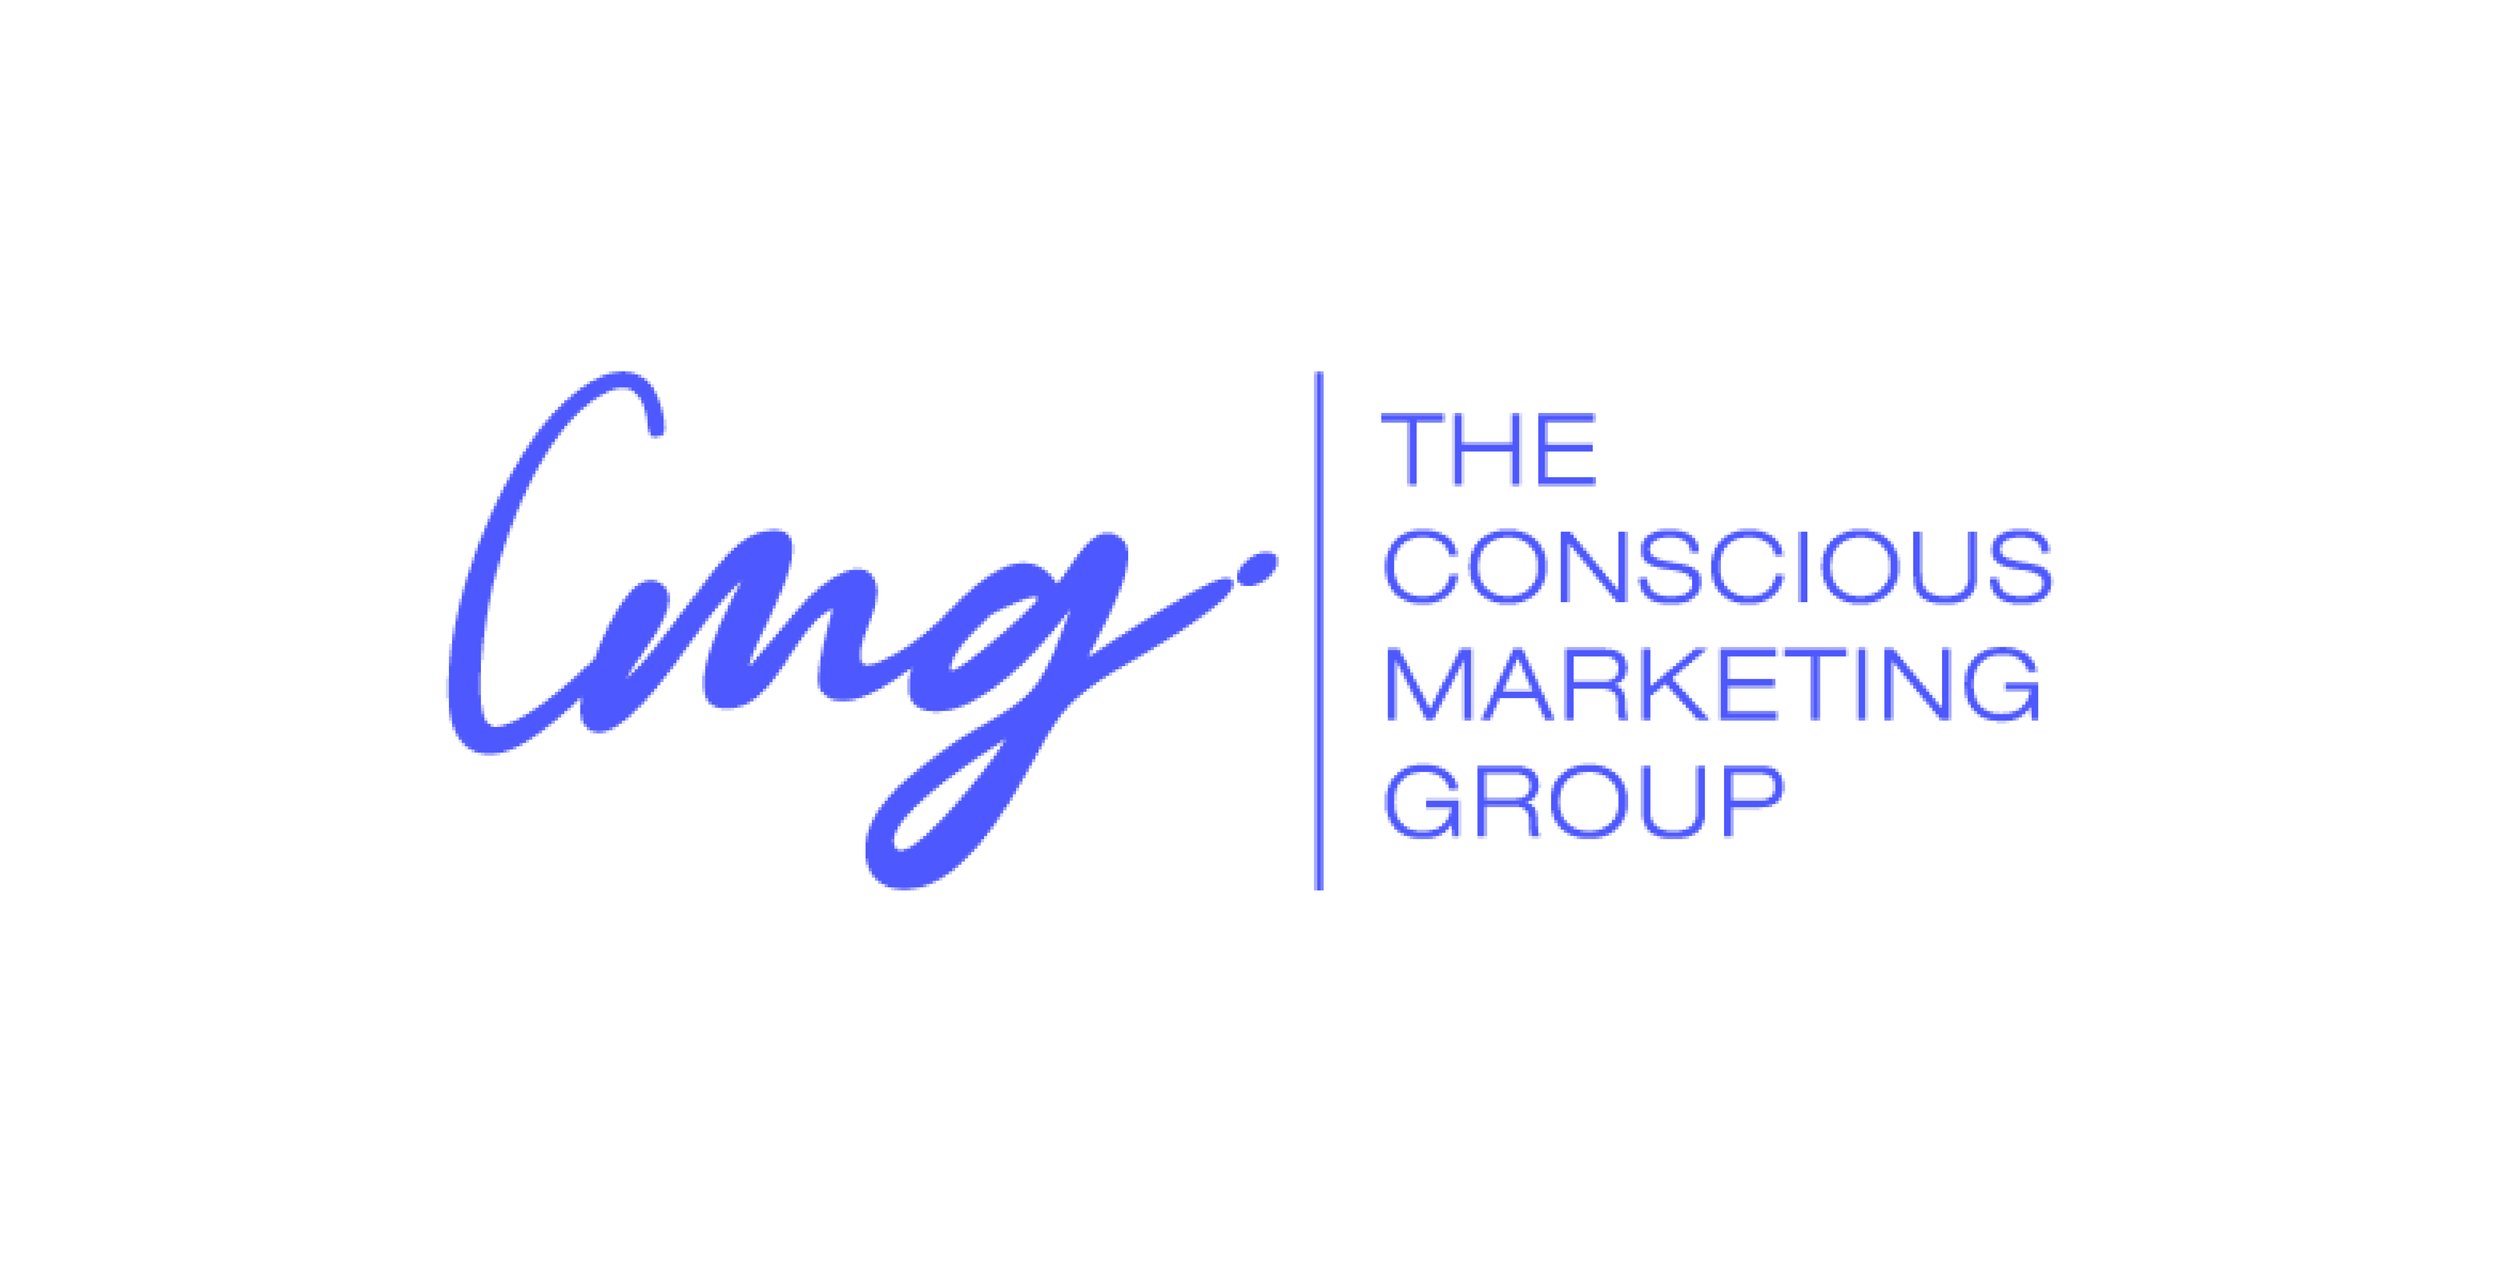 The Conscious Marketing Group